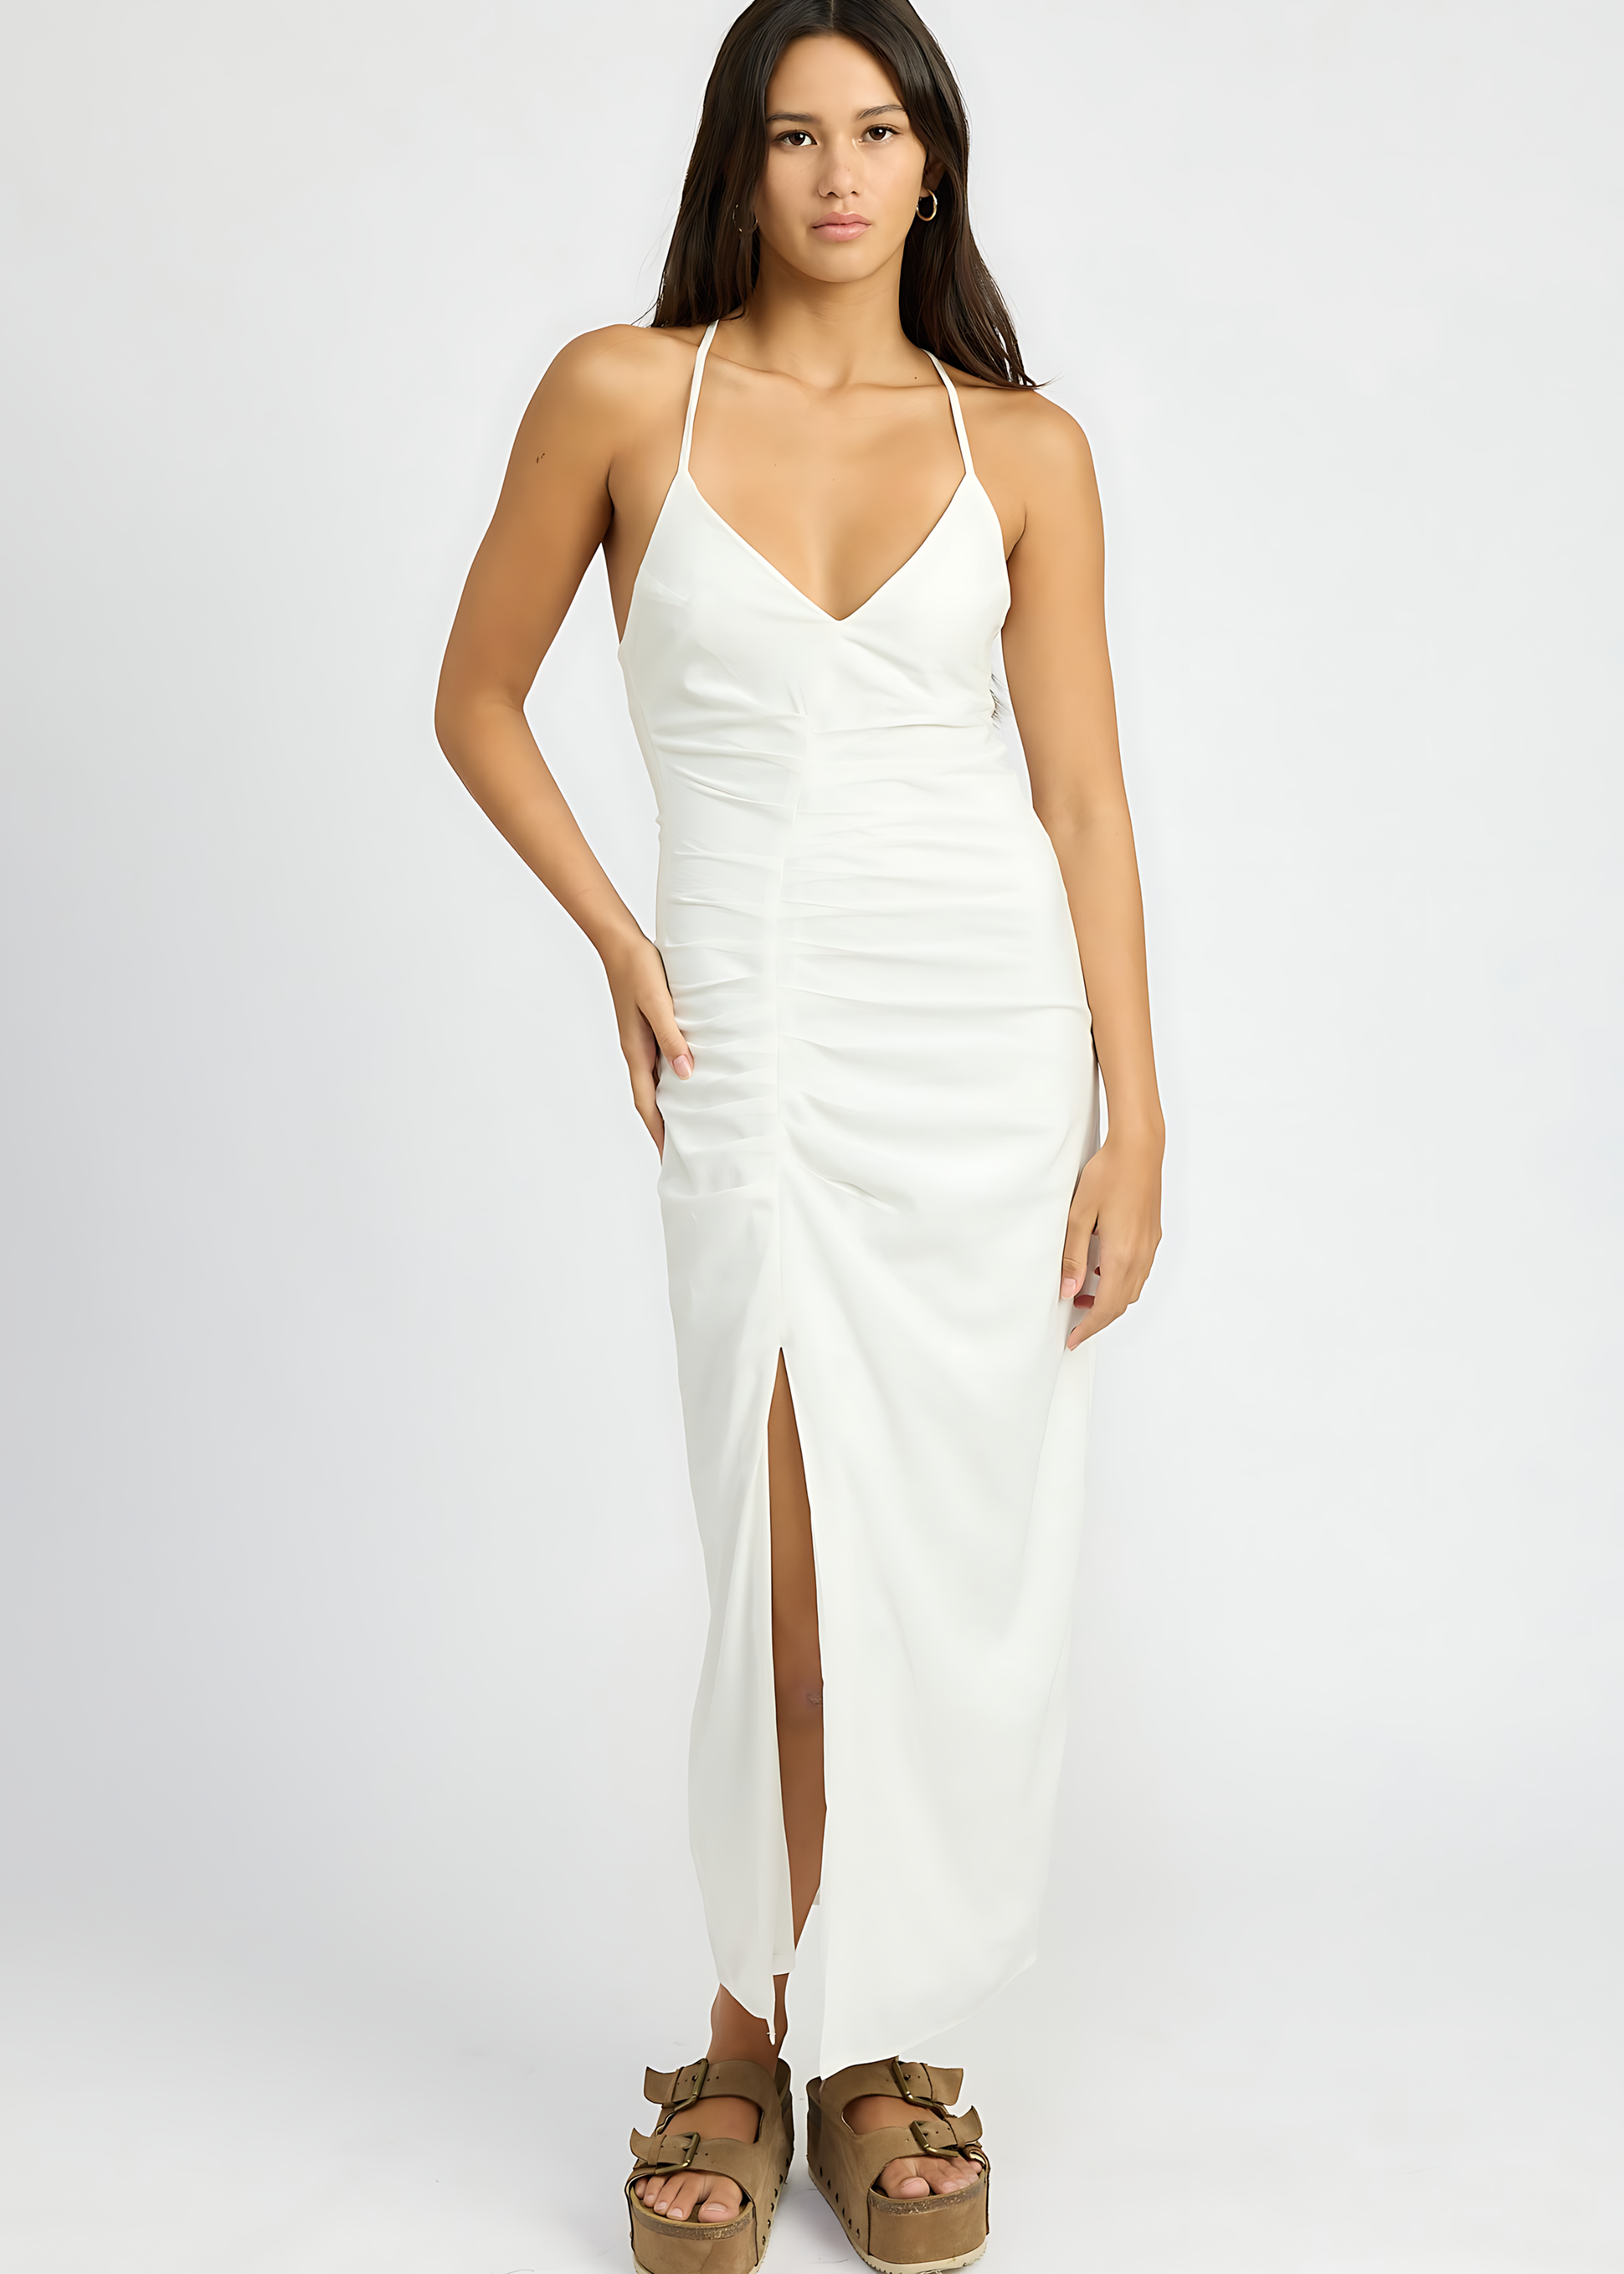 RUCHED SATIN DRESS WITH CROSSED BACK